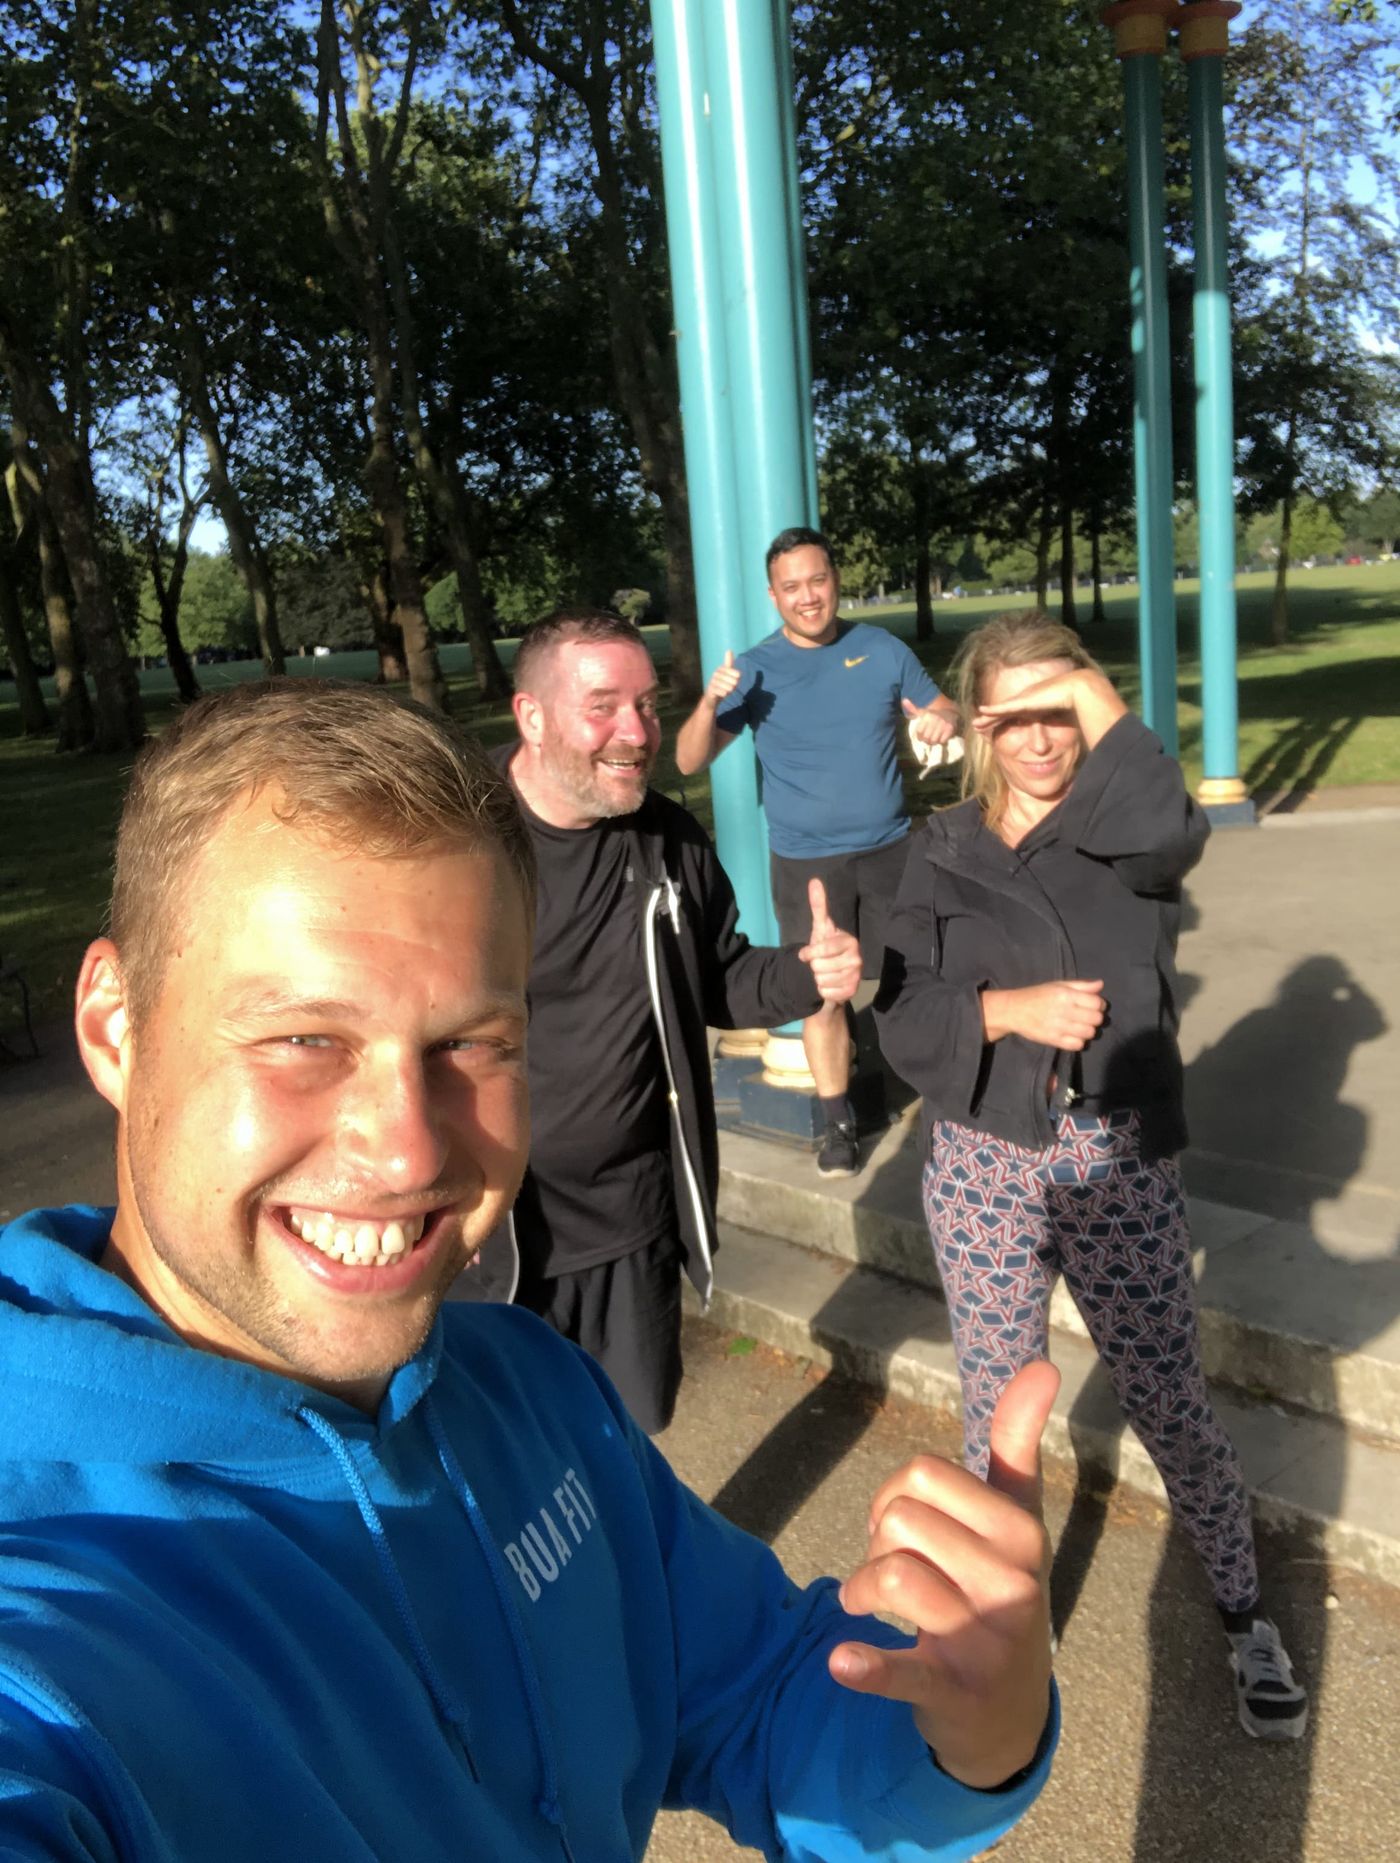 Ohhh yeah, well done for the morning survivals😎 these athletes were smashing it from 6:30am, huge respect for all of you guys👍🏽 I’ll see you next time 💪🏽💪🏽💪🏽